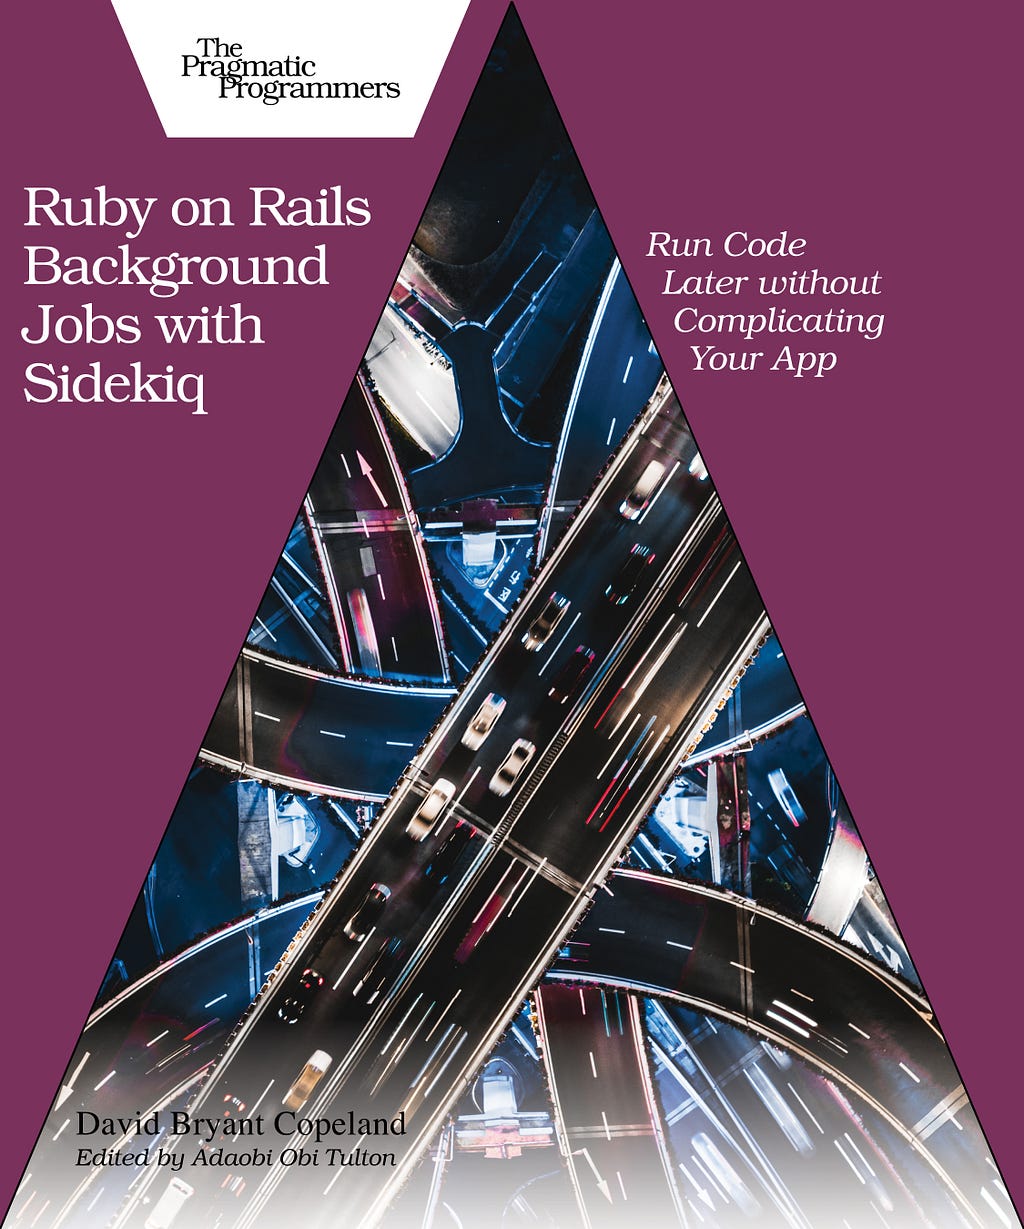 Book cover with magenta background. Triangle cutout in the middle shows a busy criss-crossing interchange of many levels with cards whizzing by.